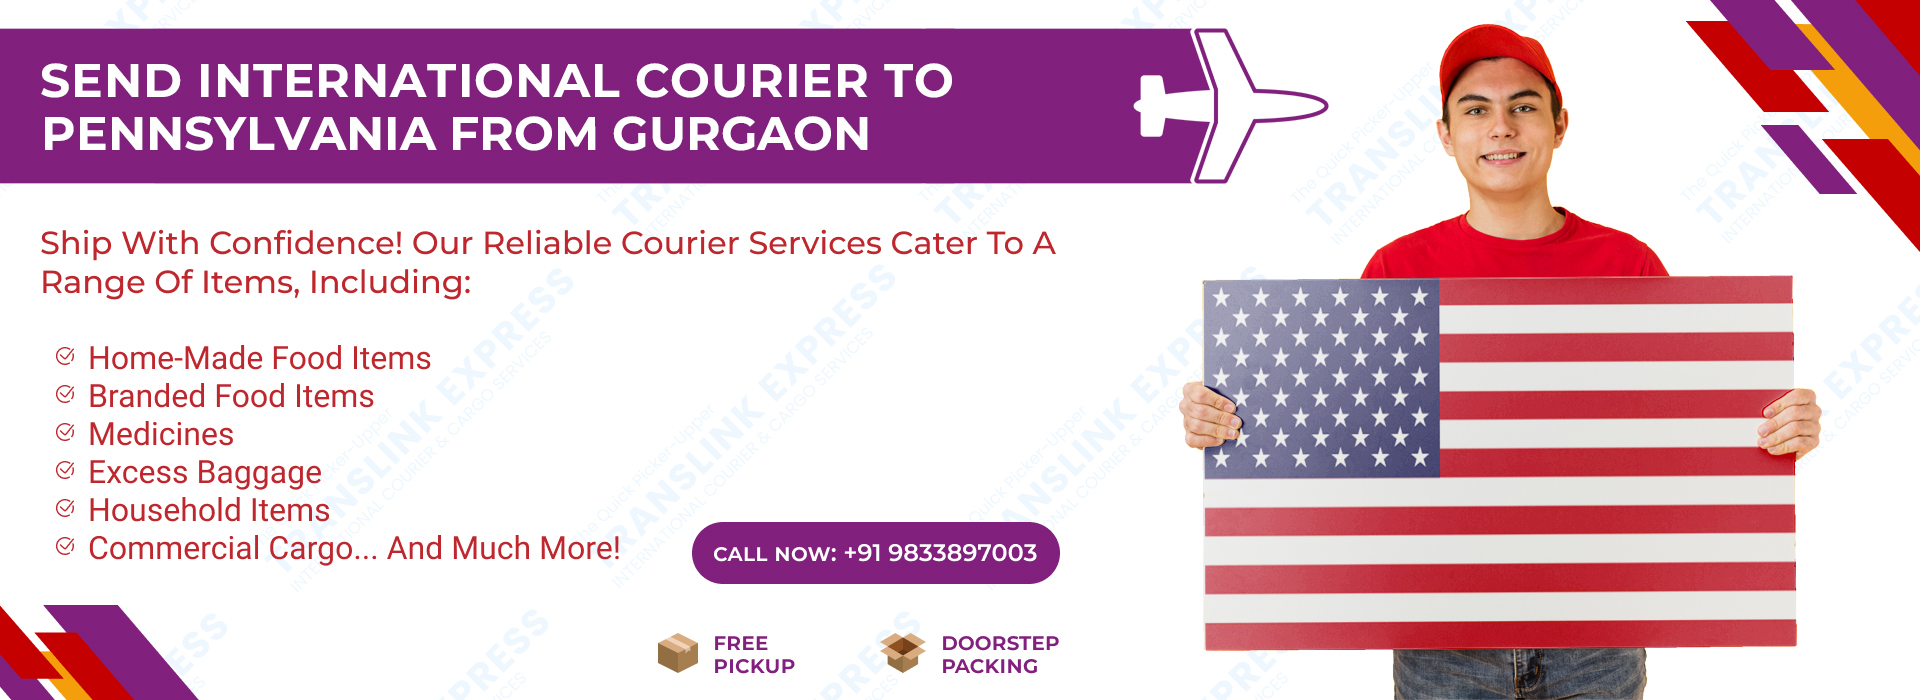 Courier to Pennsylvania From Gurgaon